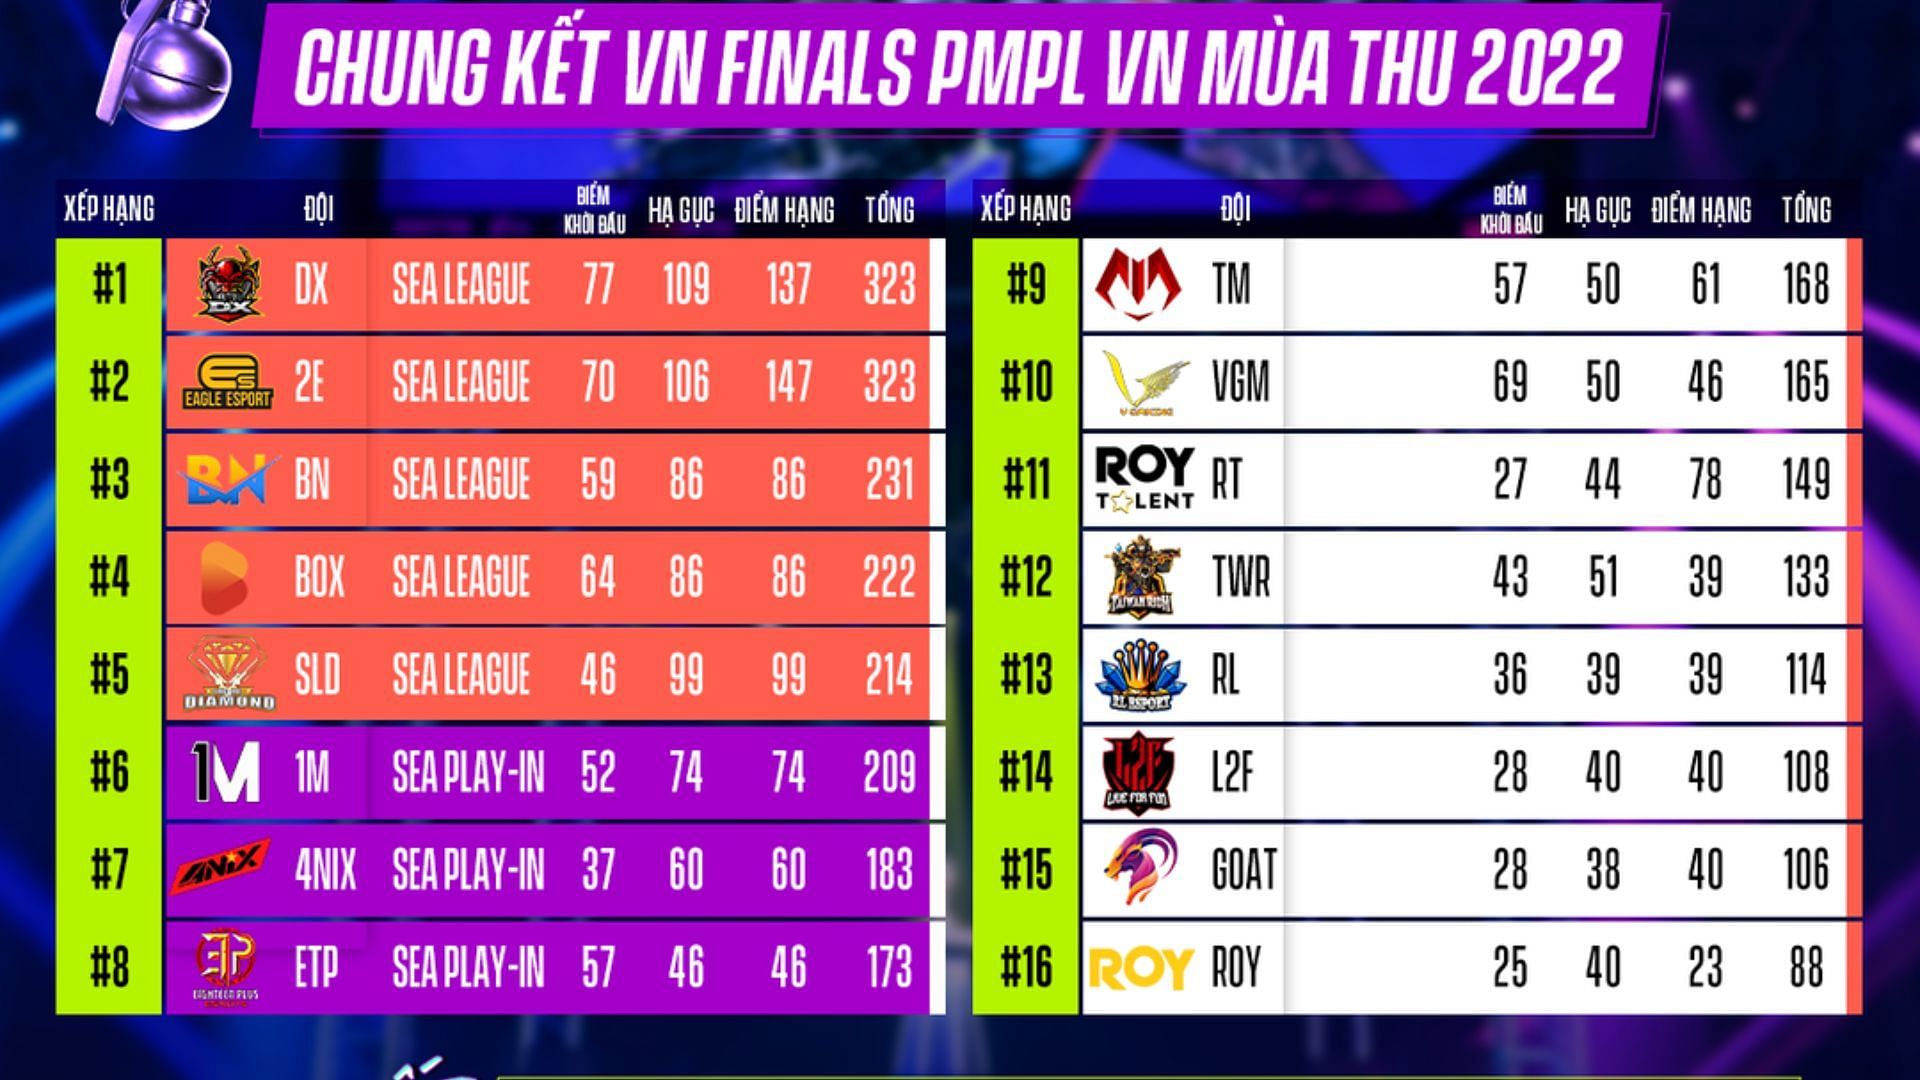 Overall standings of of PMPL Vietnam finals (Image via PUBG Mobile)